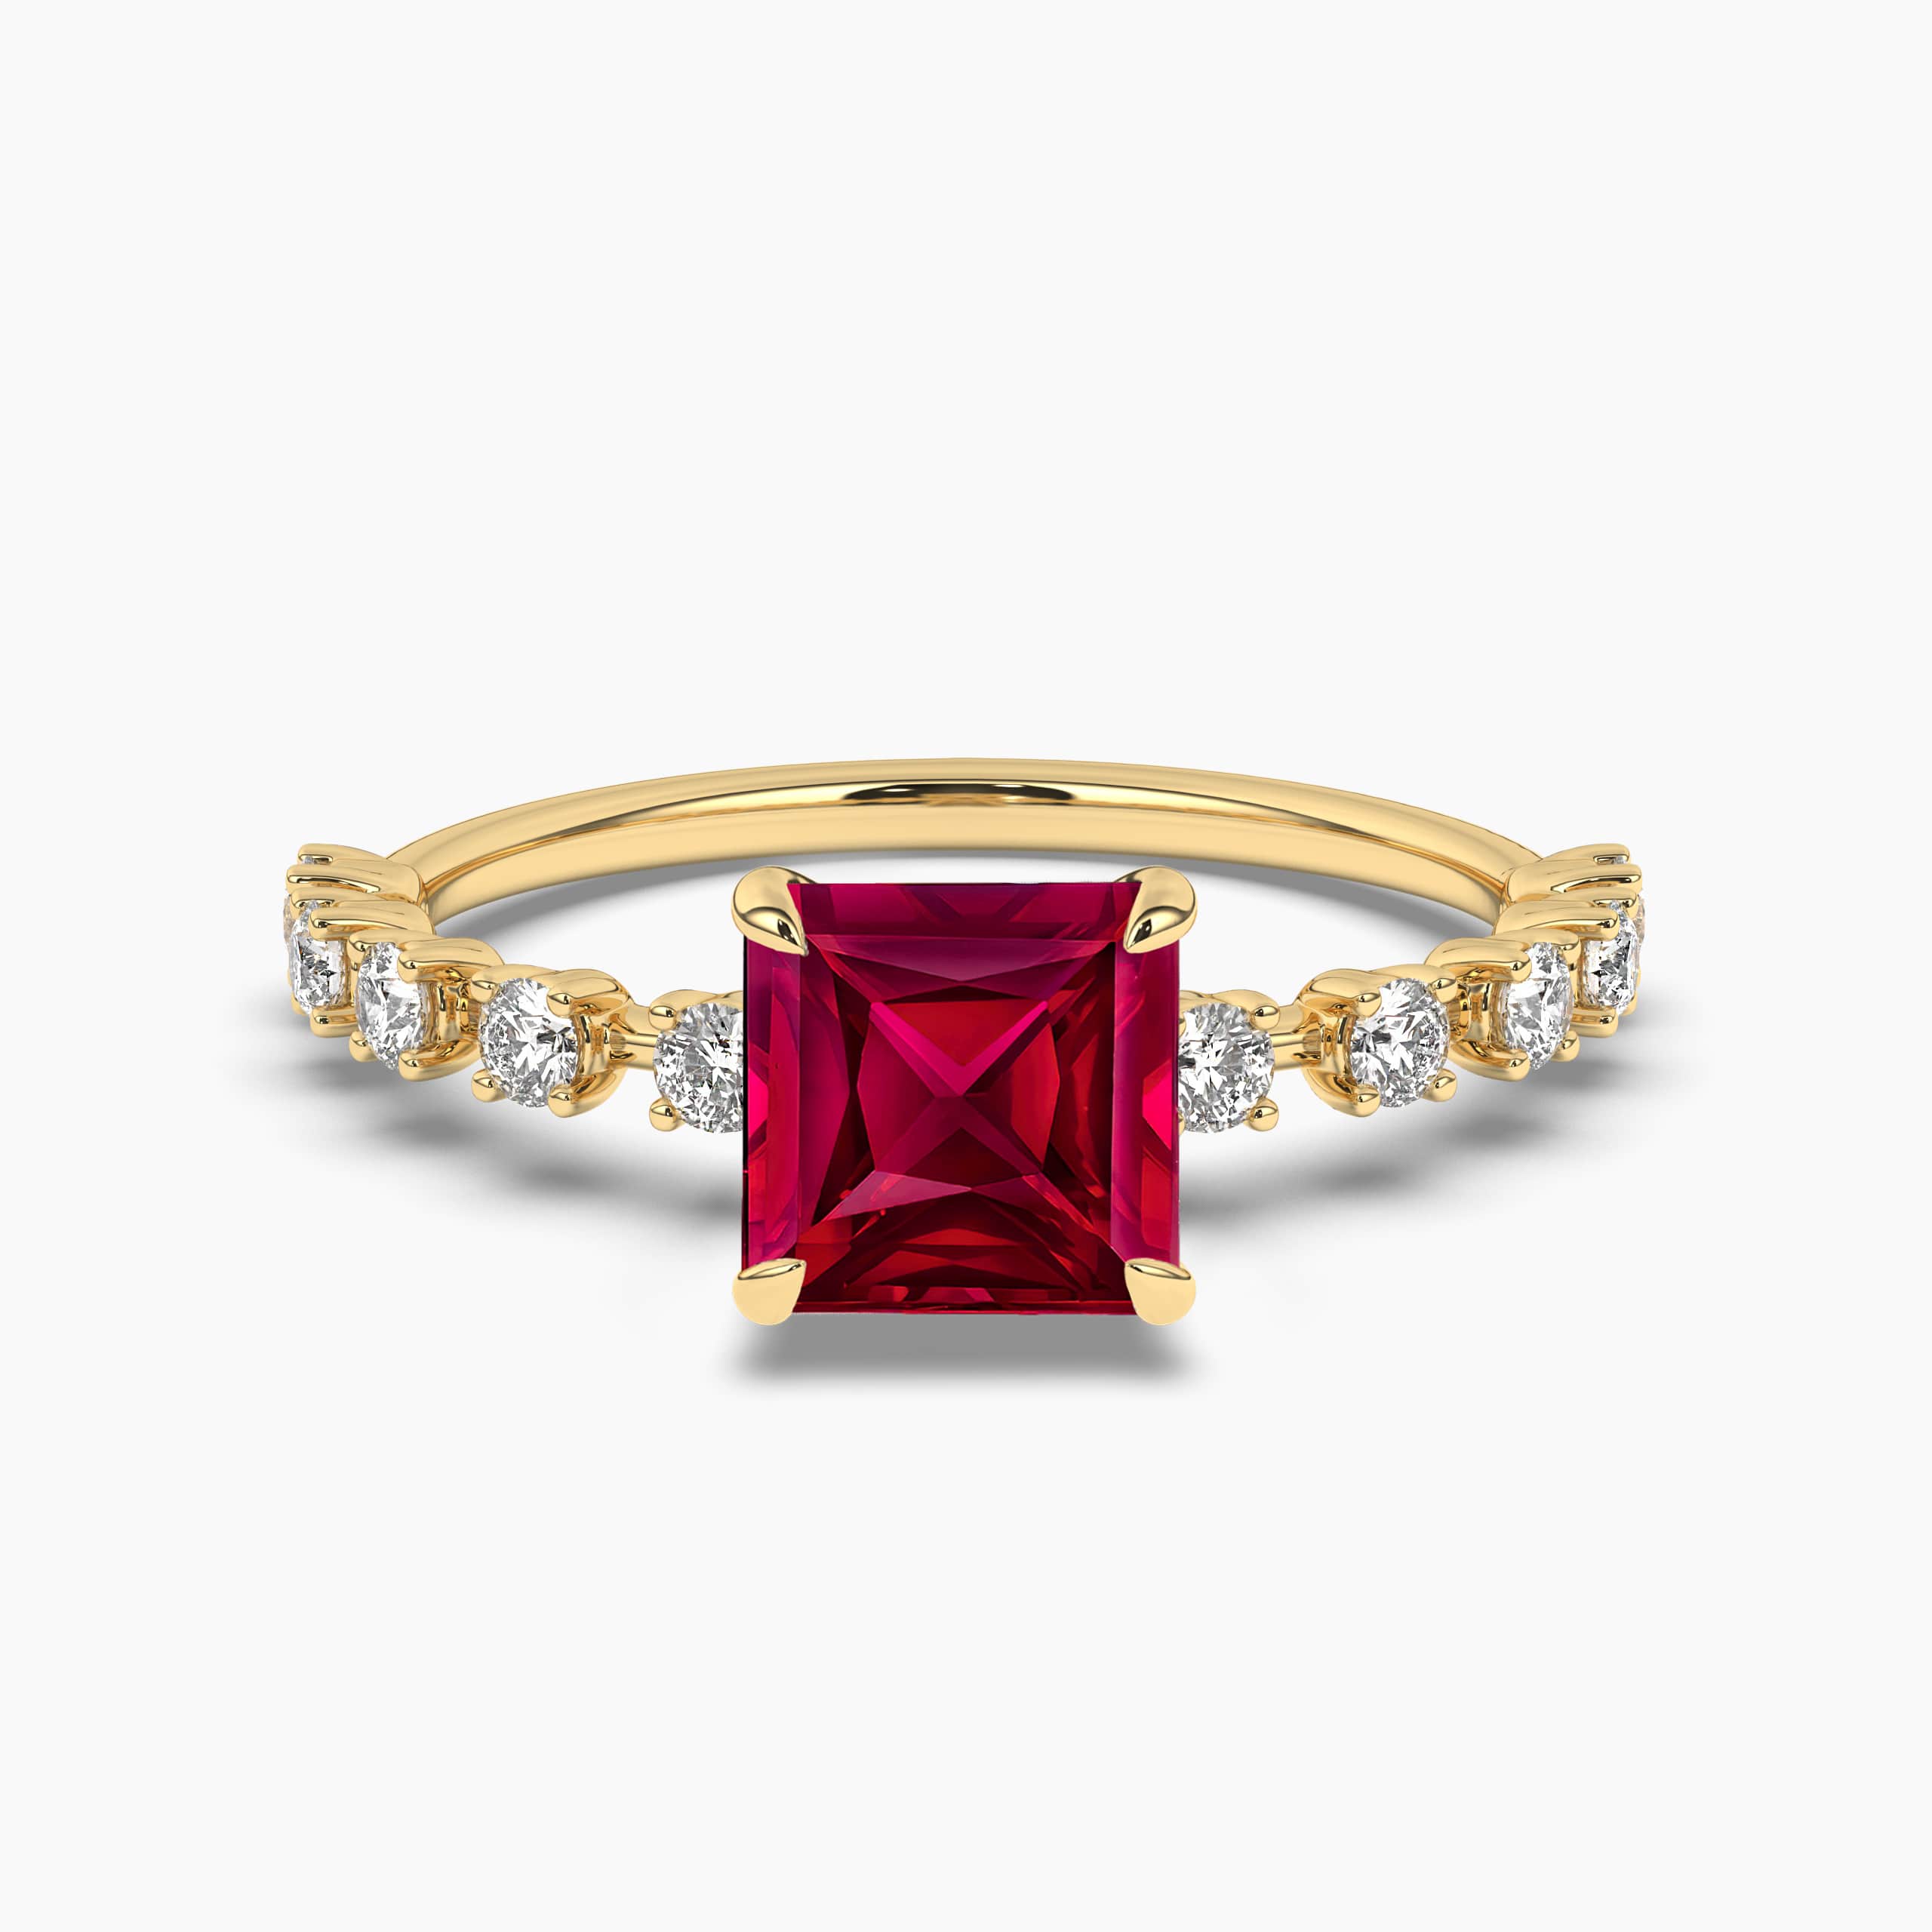 Princess Cut Ruby Solitaire Engagement Ring